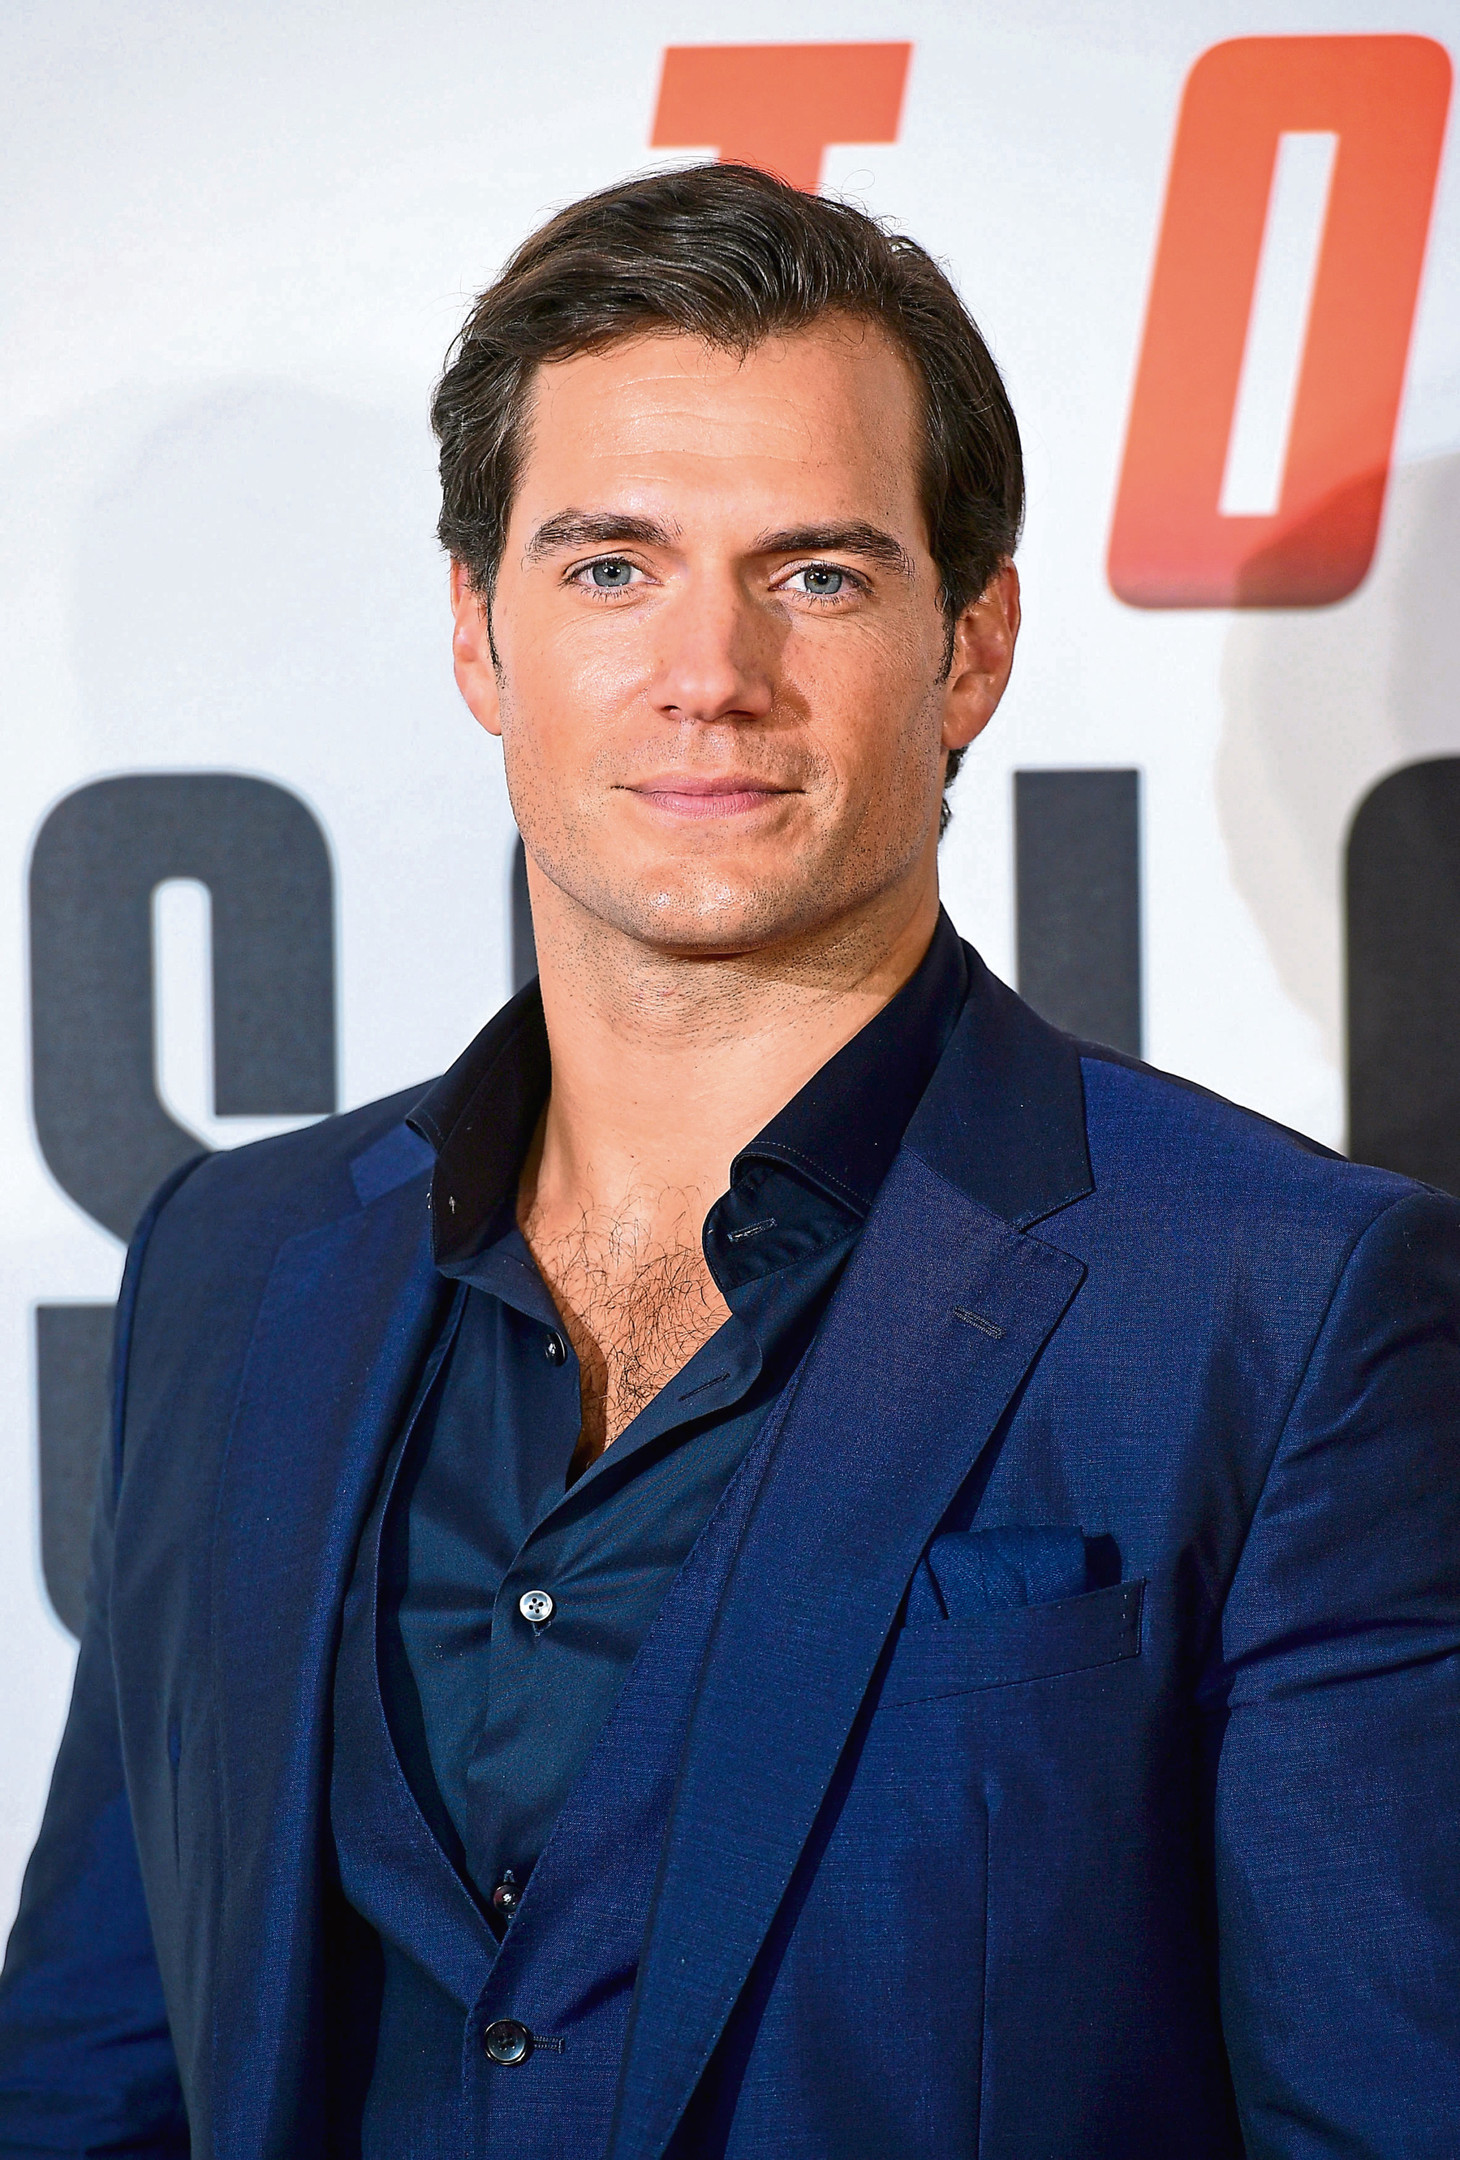 Mission Impossible
2807 YL
13/07/18 PA File Photo ofÊHenry Cavill attending the Mission: Impossible Fallout premiere at the BFI Imax, Waterloo, London. See PA Feature SHOWBIZ Film Cavill.ÊPicture credit should read: Ian West/PA Photos.ÊWARNING: This picture must only be used to accompany PA Feature SHOWBIZ Film Cavill.